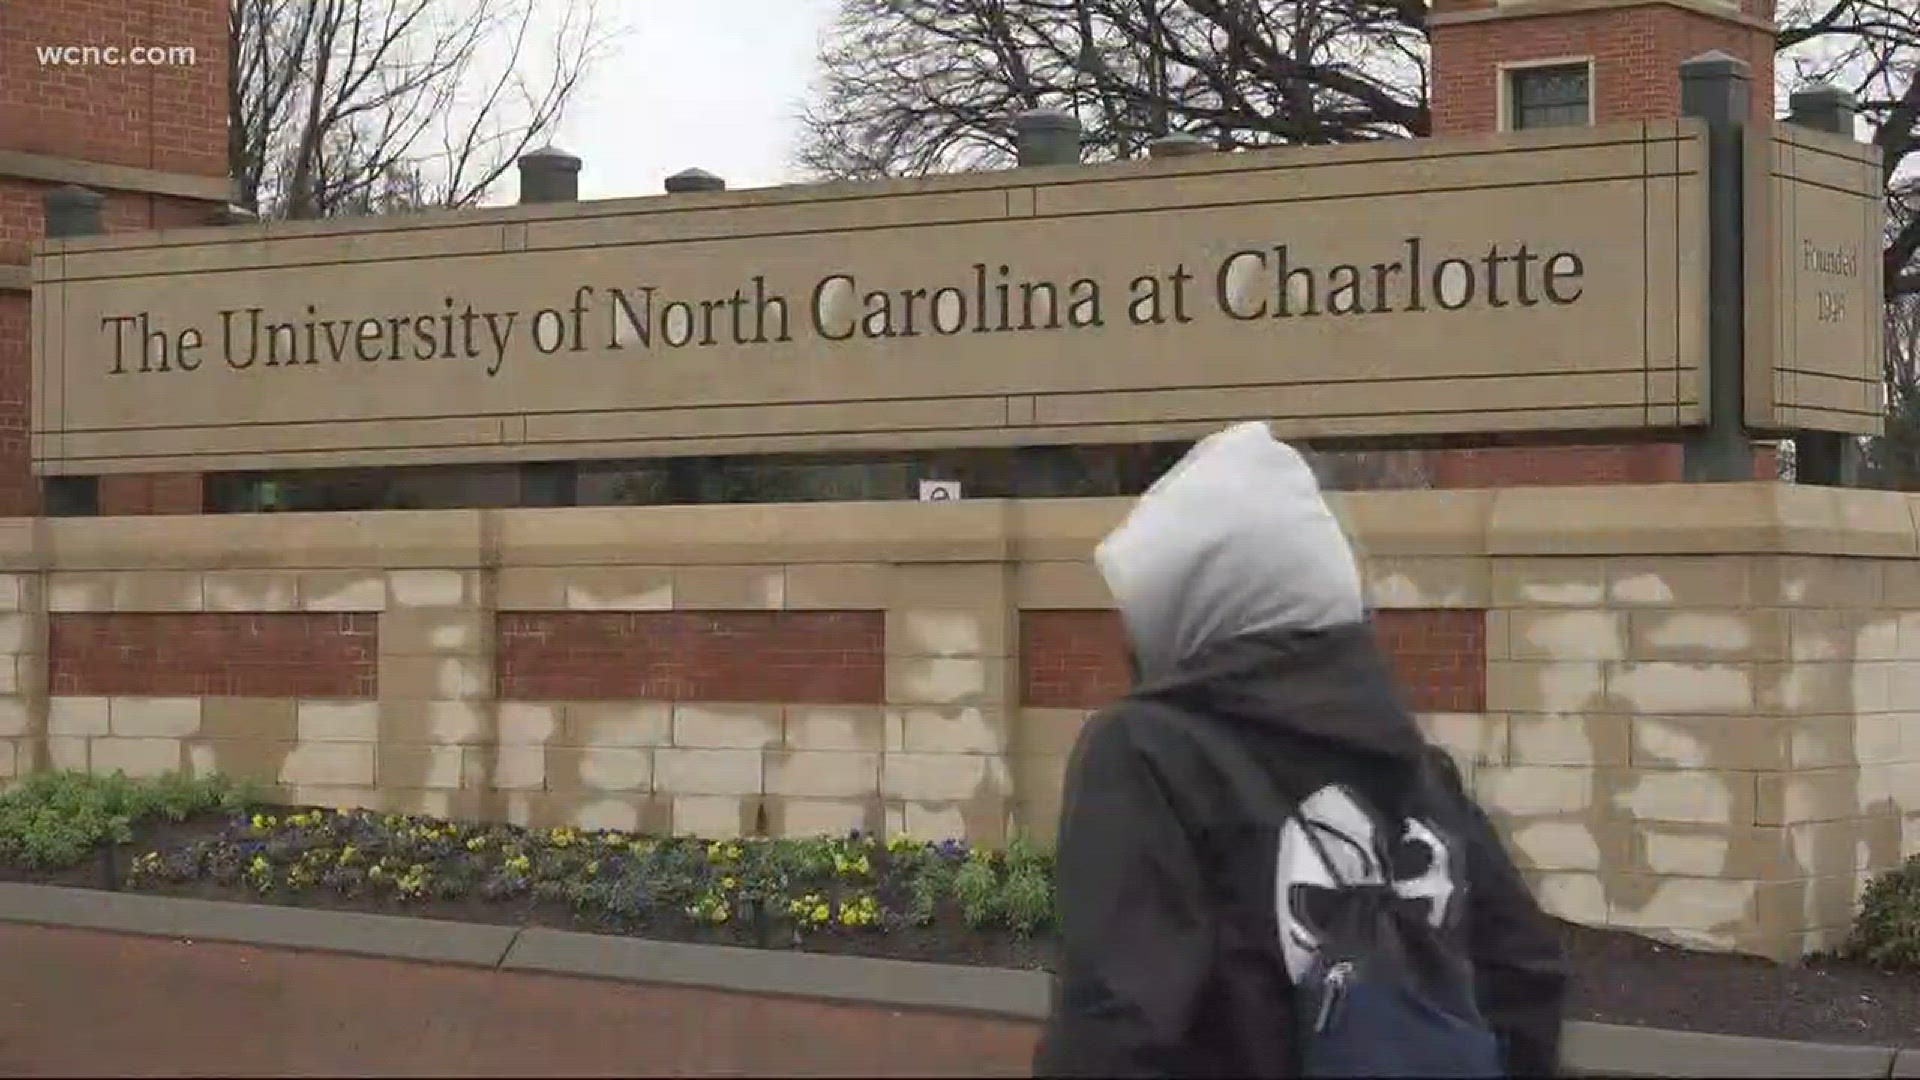 A student suspected of threatening to shoot up The University of North Carolina Charlotte has been released from jail, putting students on alert.